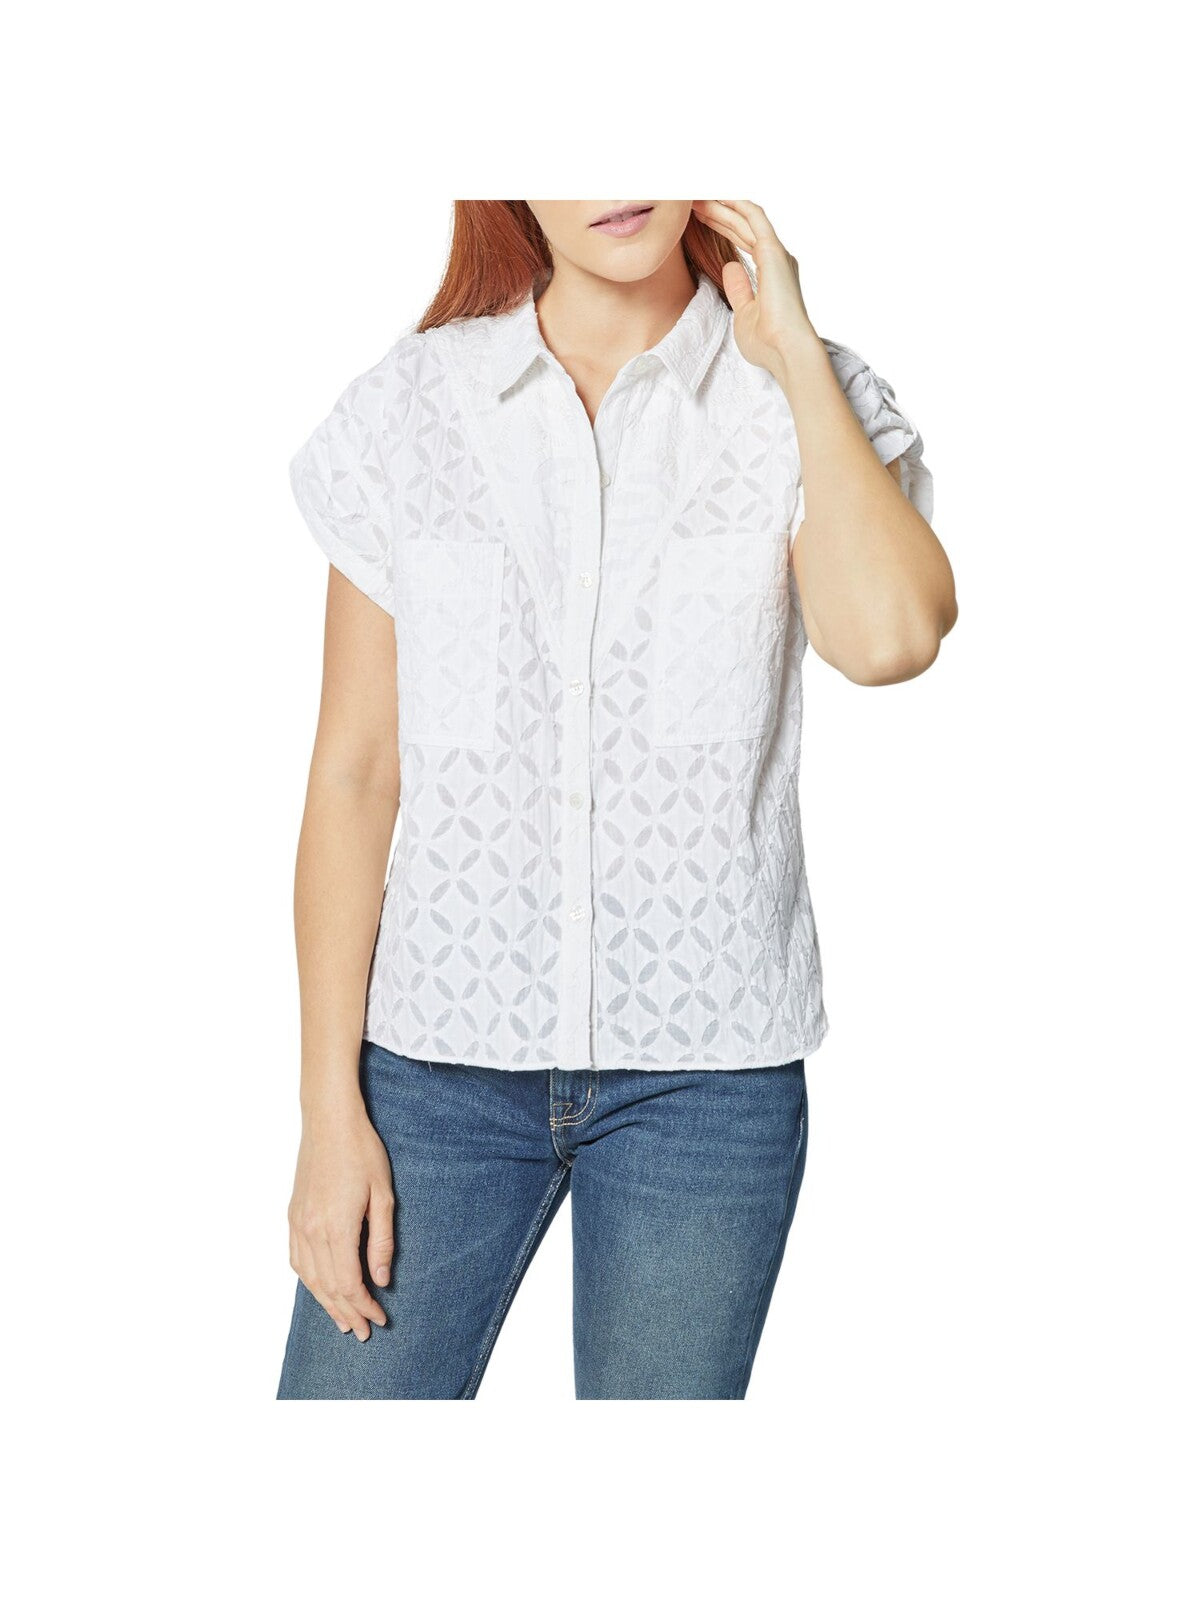 JOIE Womens White Pocketed Textured Shoulder Tabs Geometric Cap Sleeve Collared Wear To Work Button Up Top XL